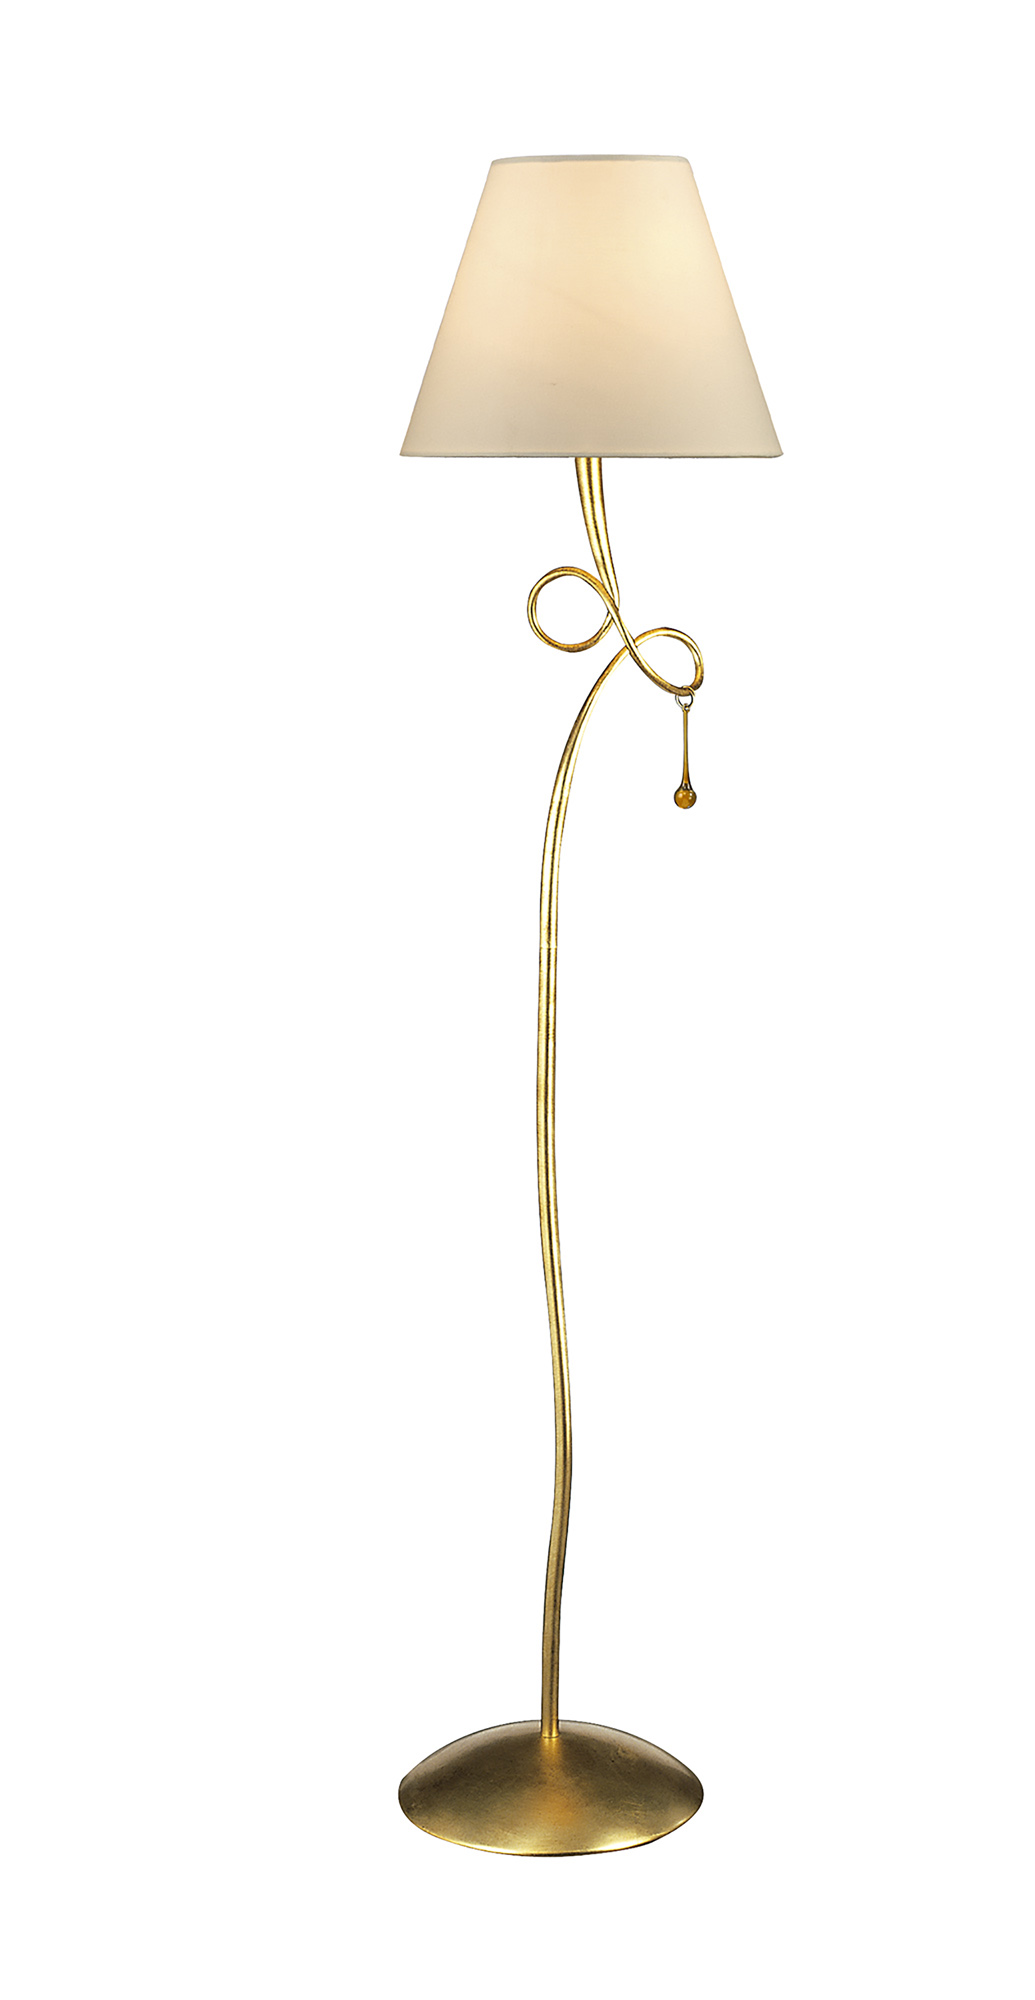 Paola Gold Floor Lamps Mantra Shaded Floor Lamps